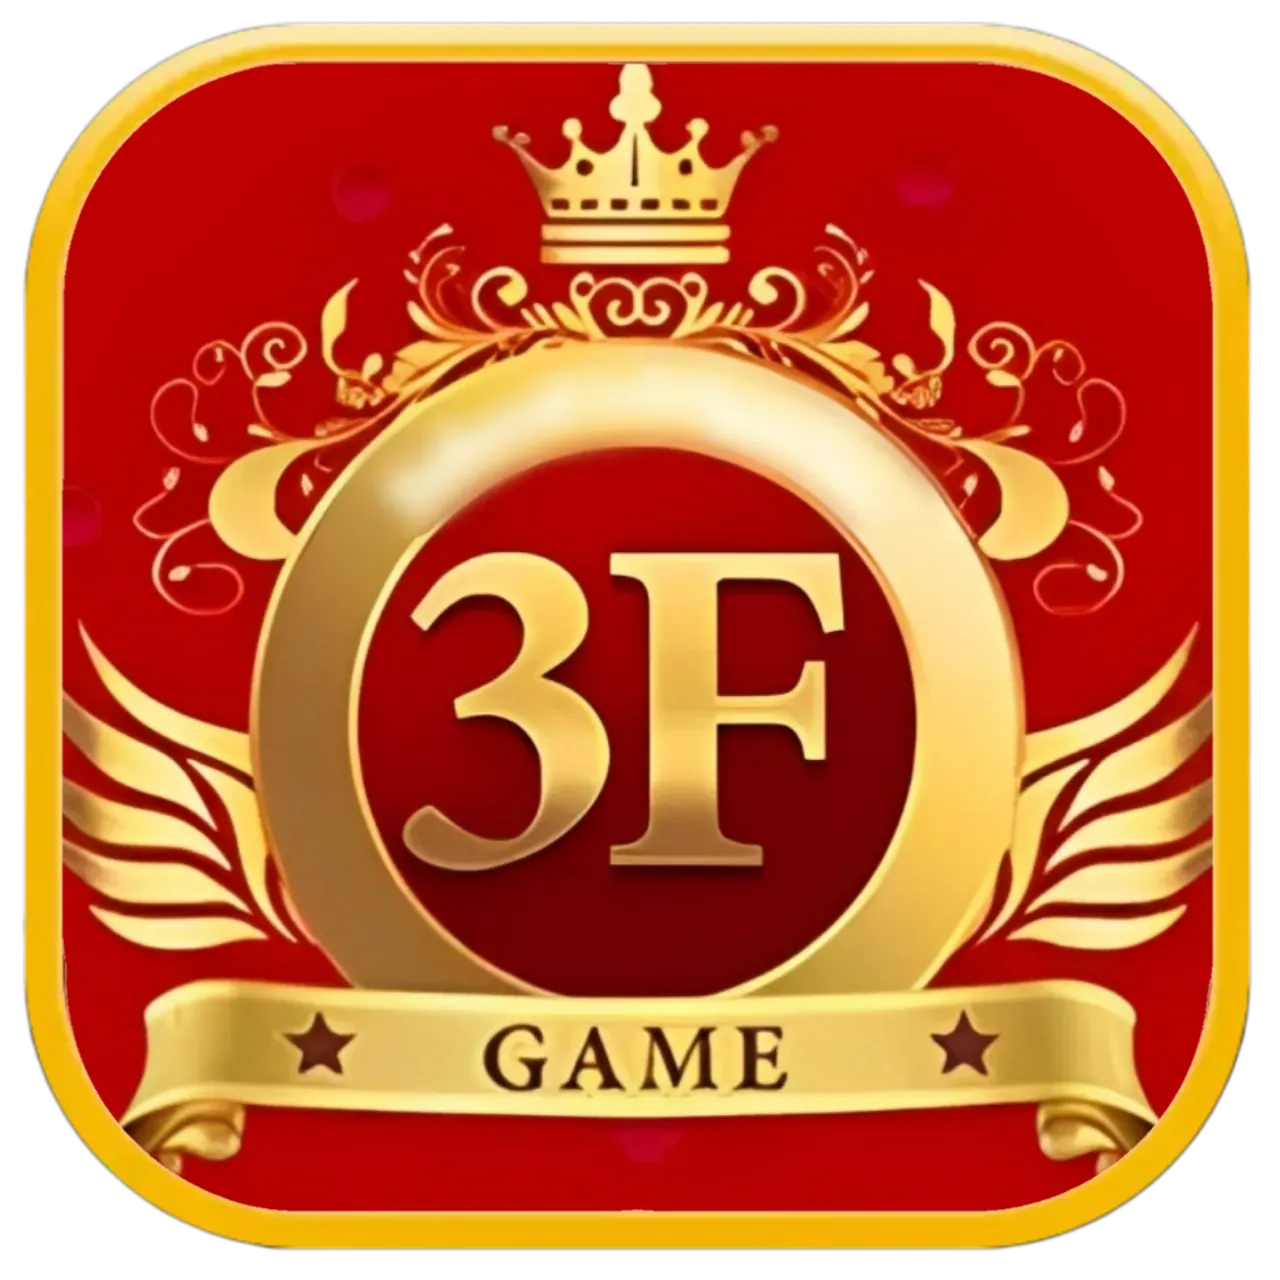 3F Game APK Download - Get 20 | Withdraw 100